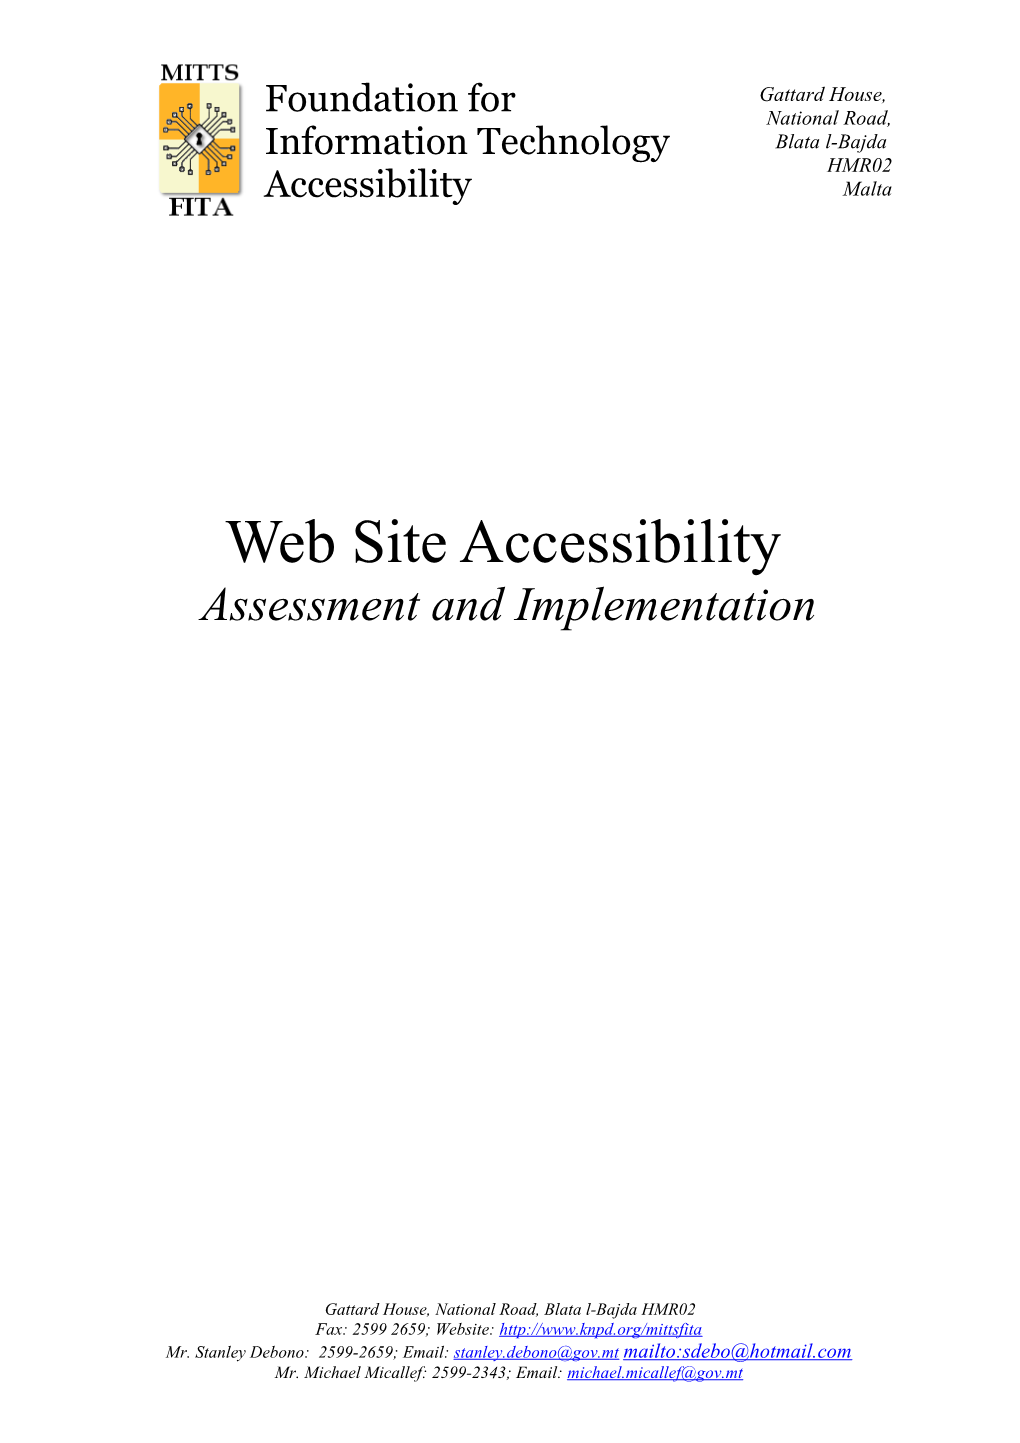 Web Accessibility - Assessment and Implementation